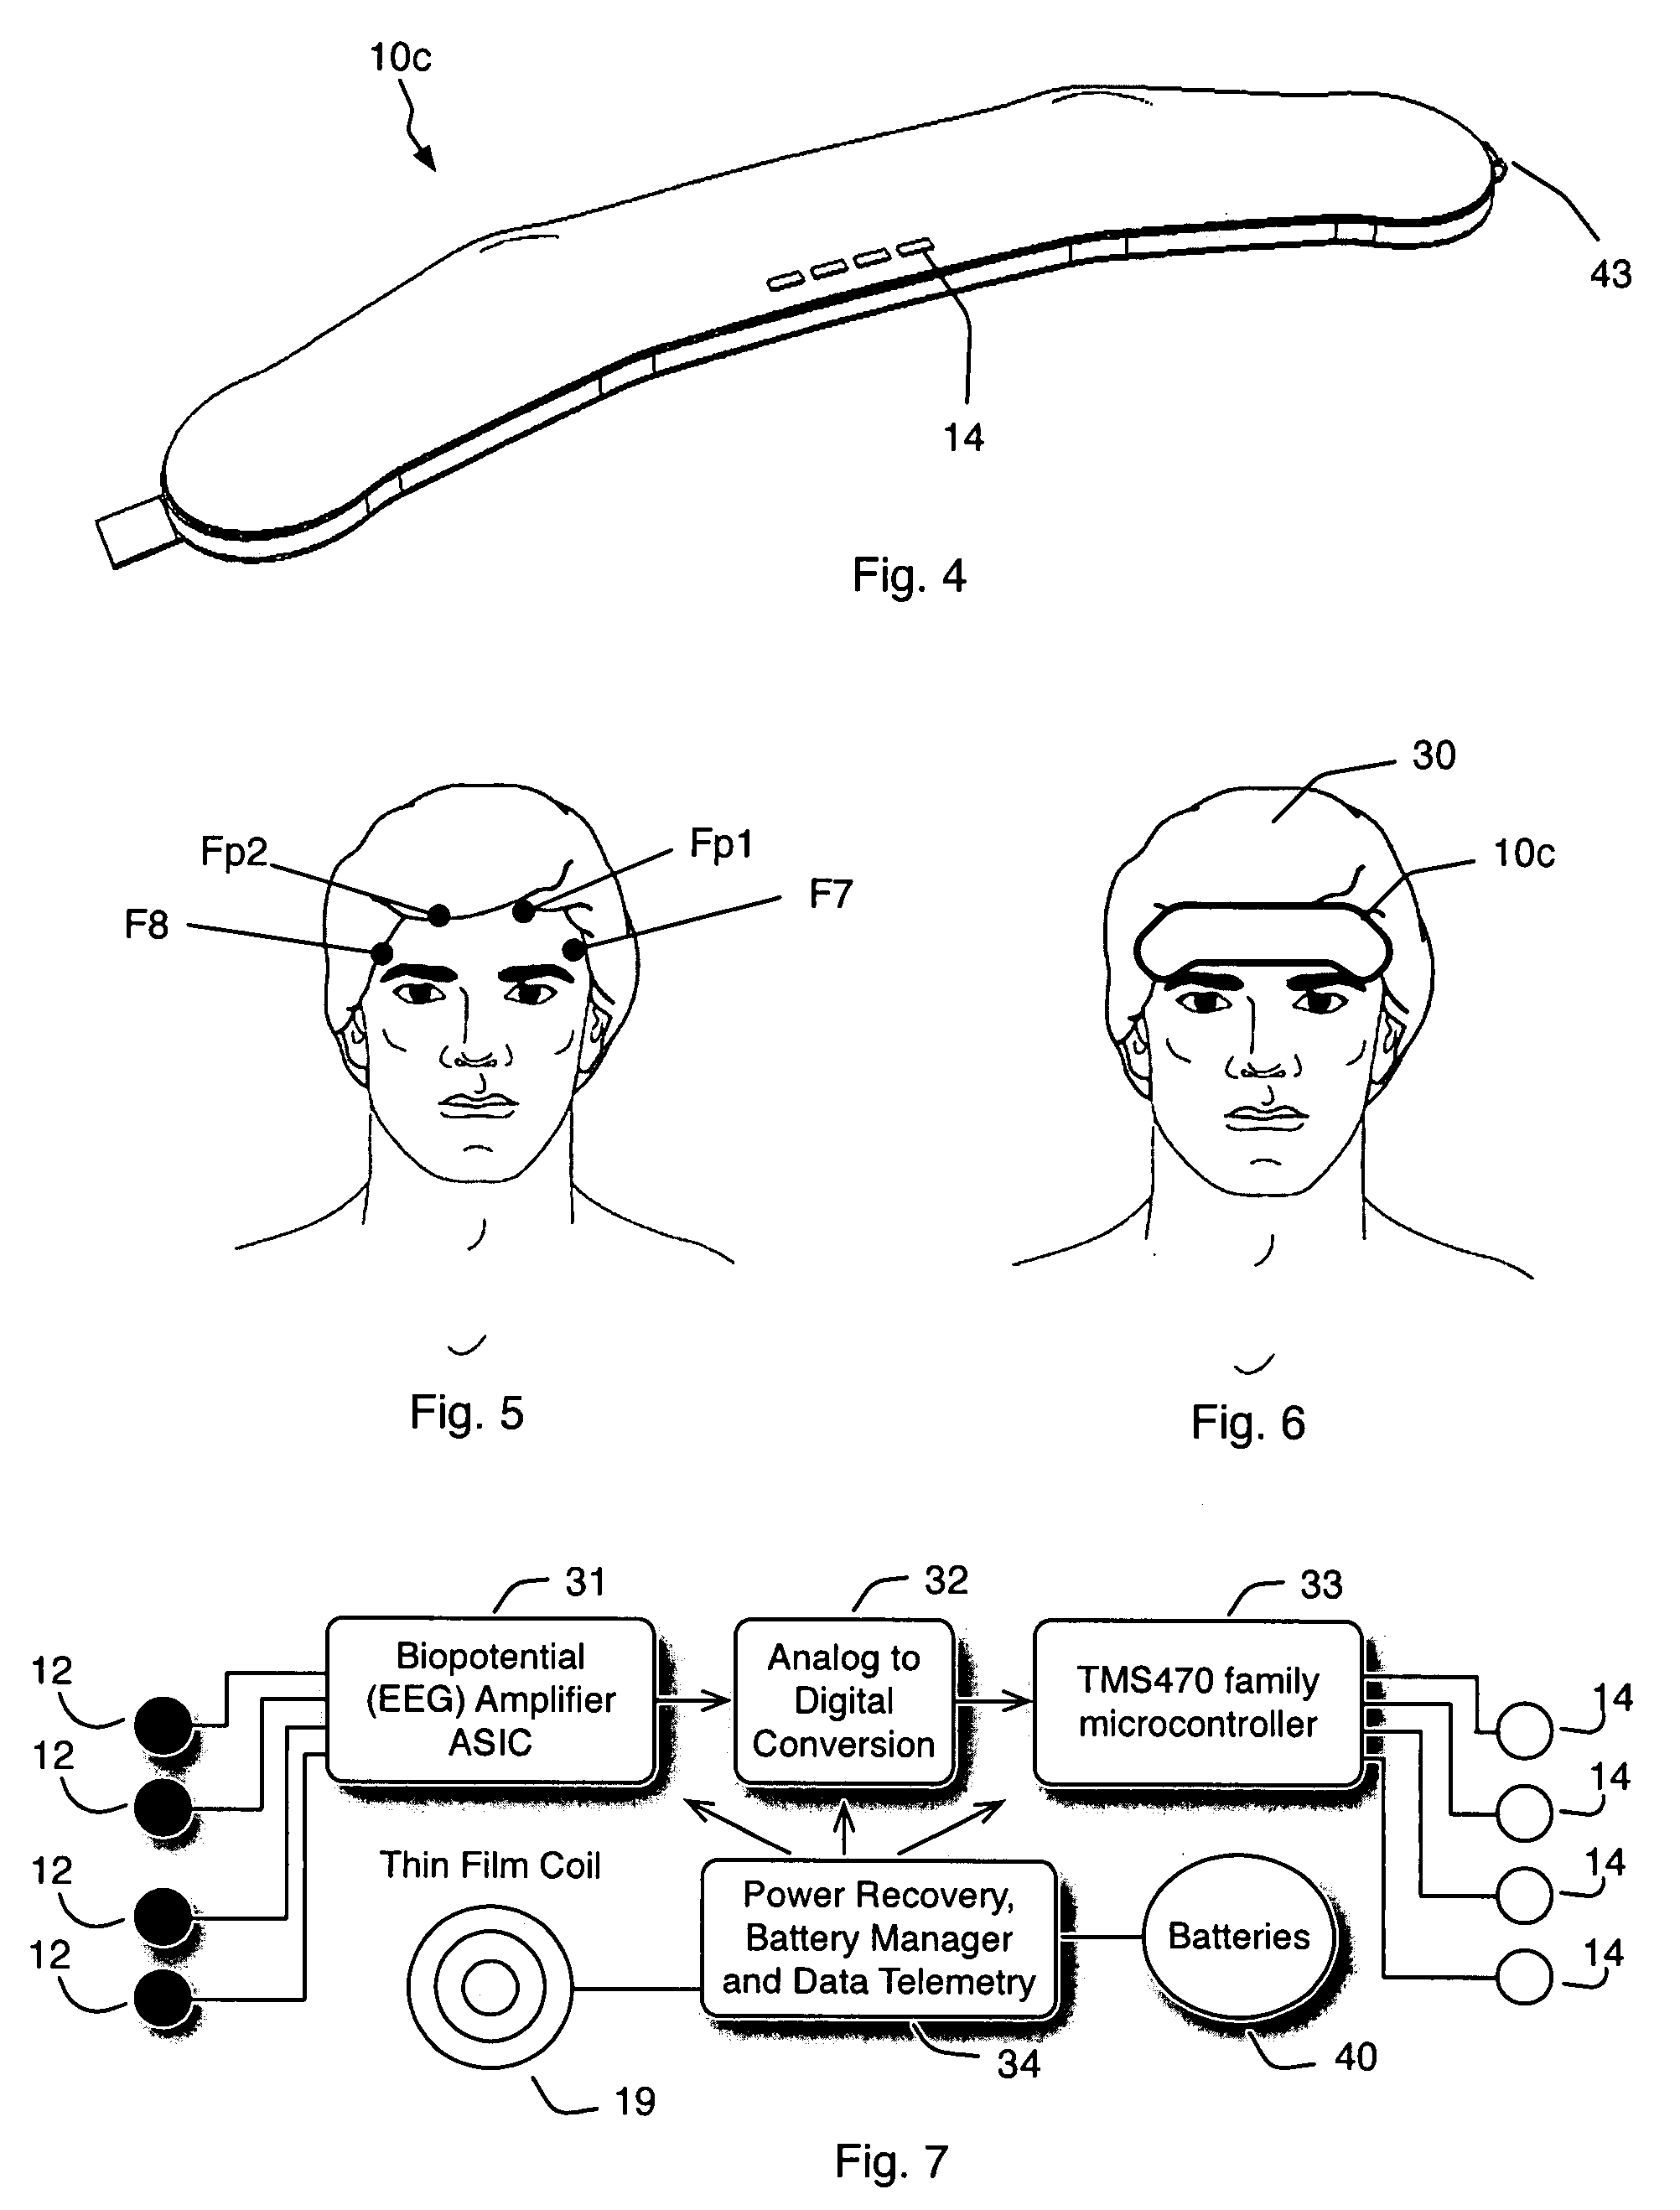 Self-contained surface physiological monitor with adhesive attachment